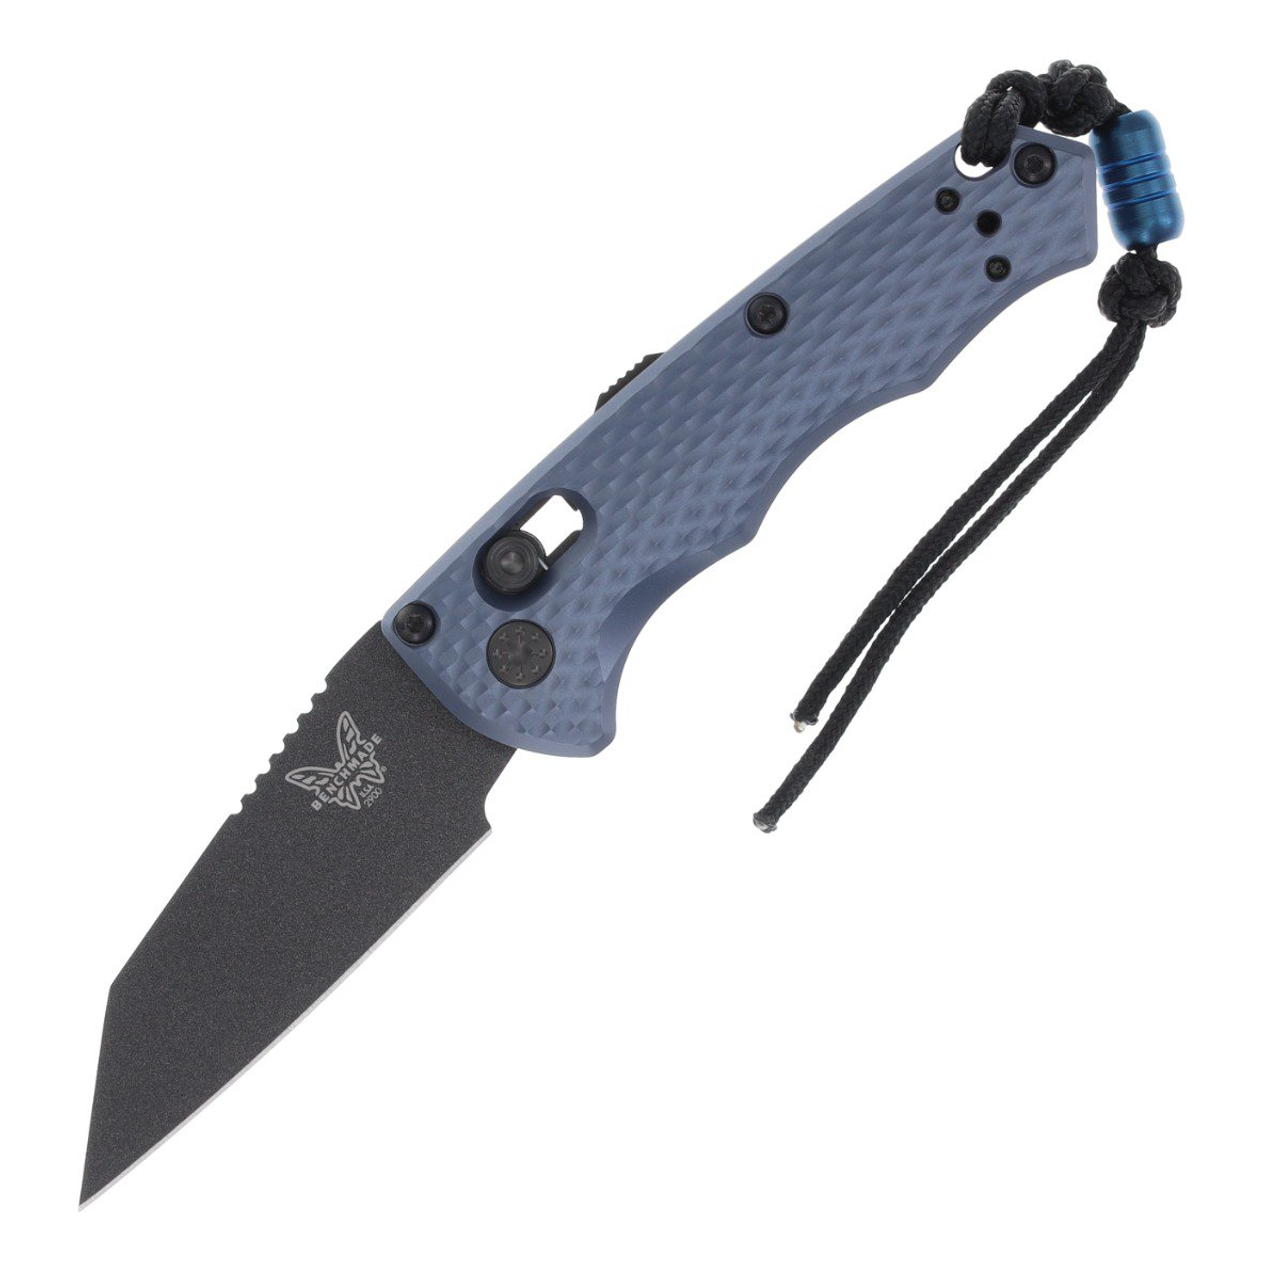 Benchmade Immunity Black CPM-M4 AXIS Lock Automatic Knife 2900BK product image